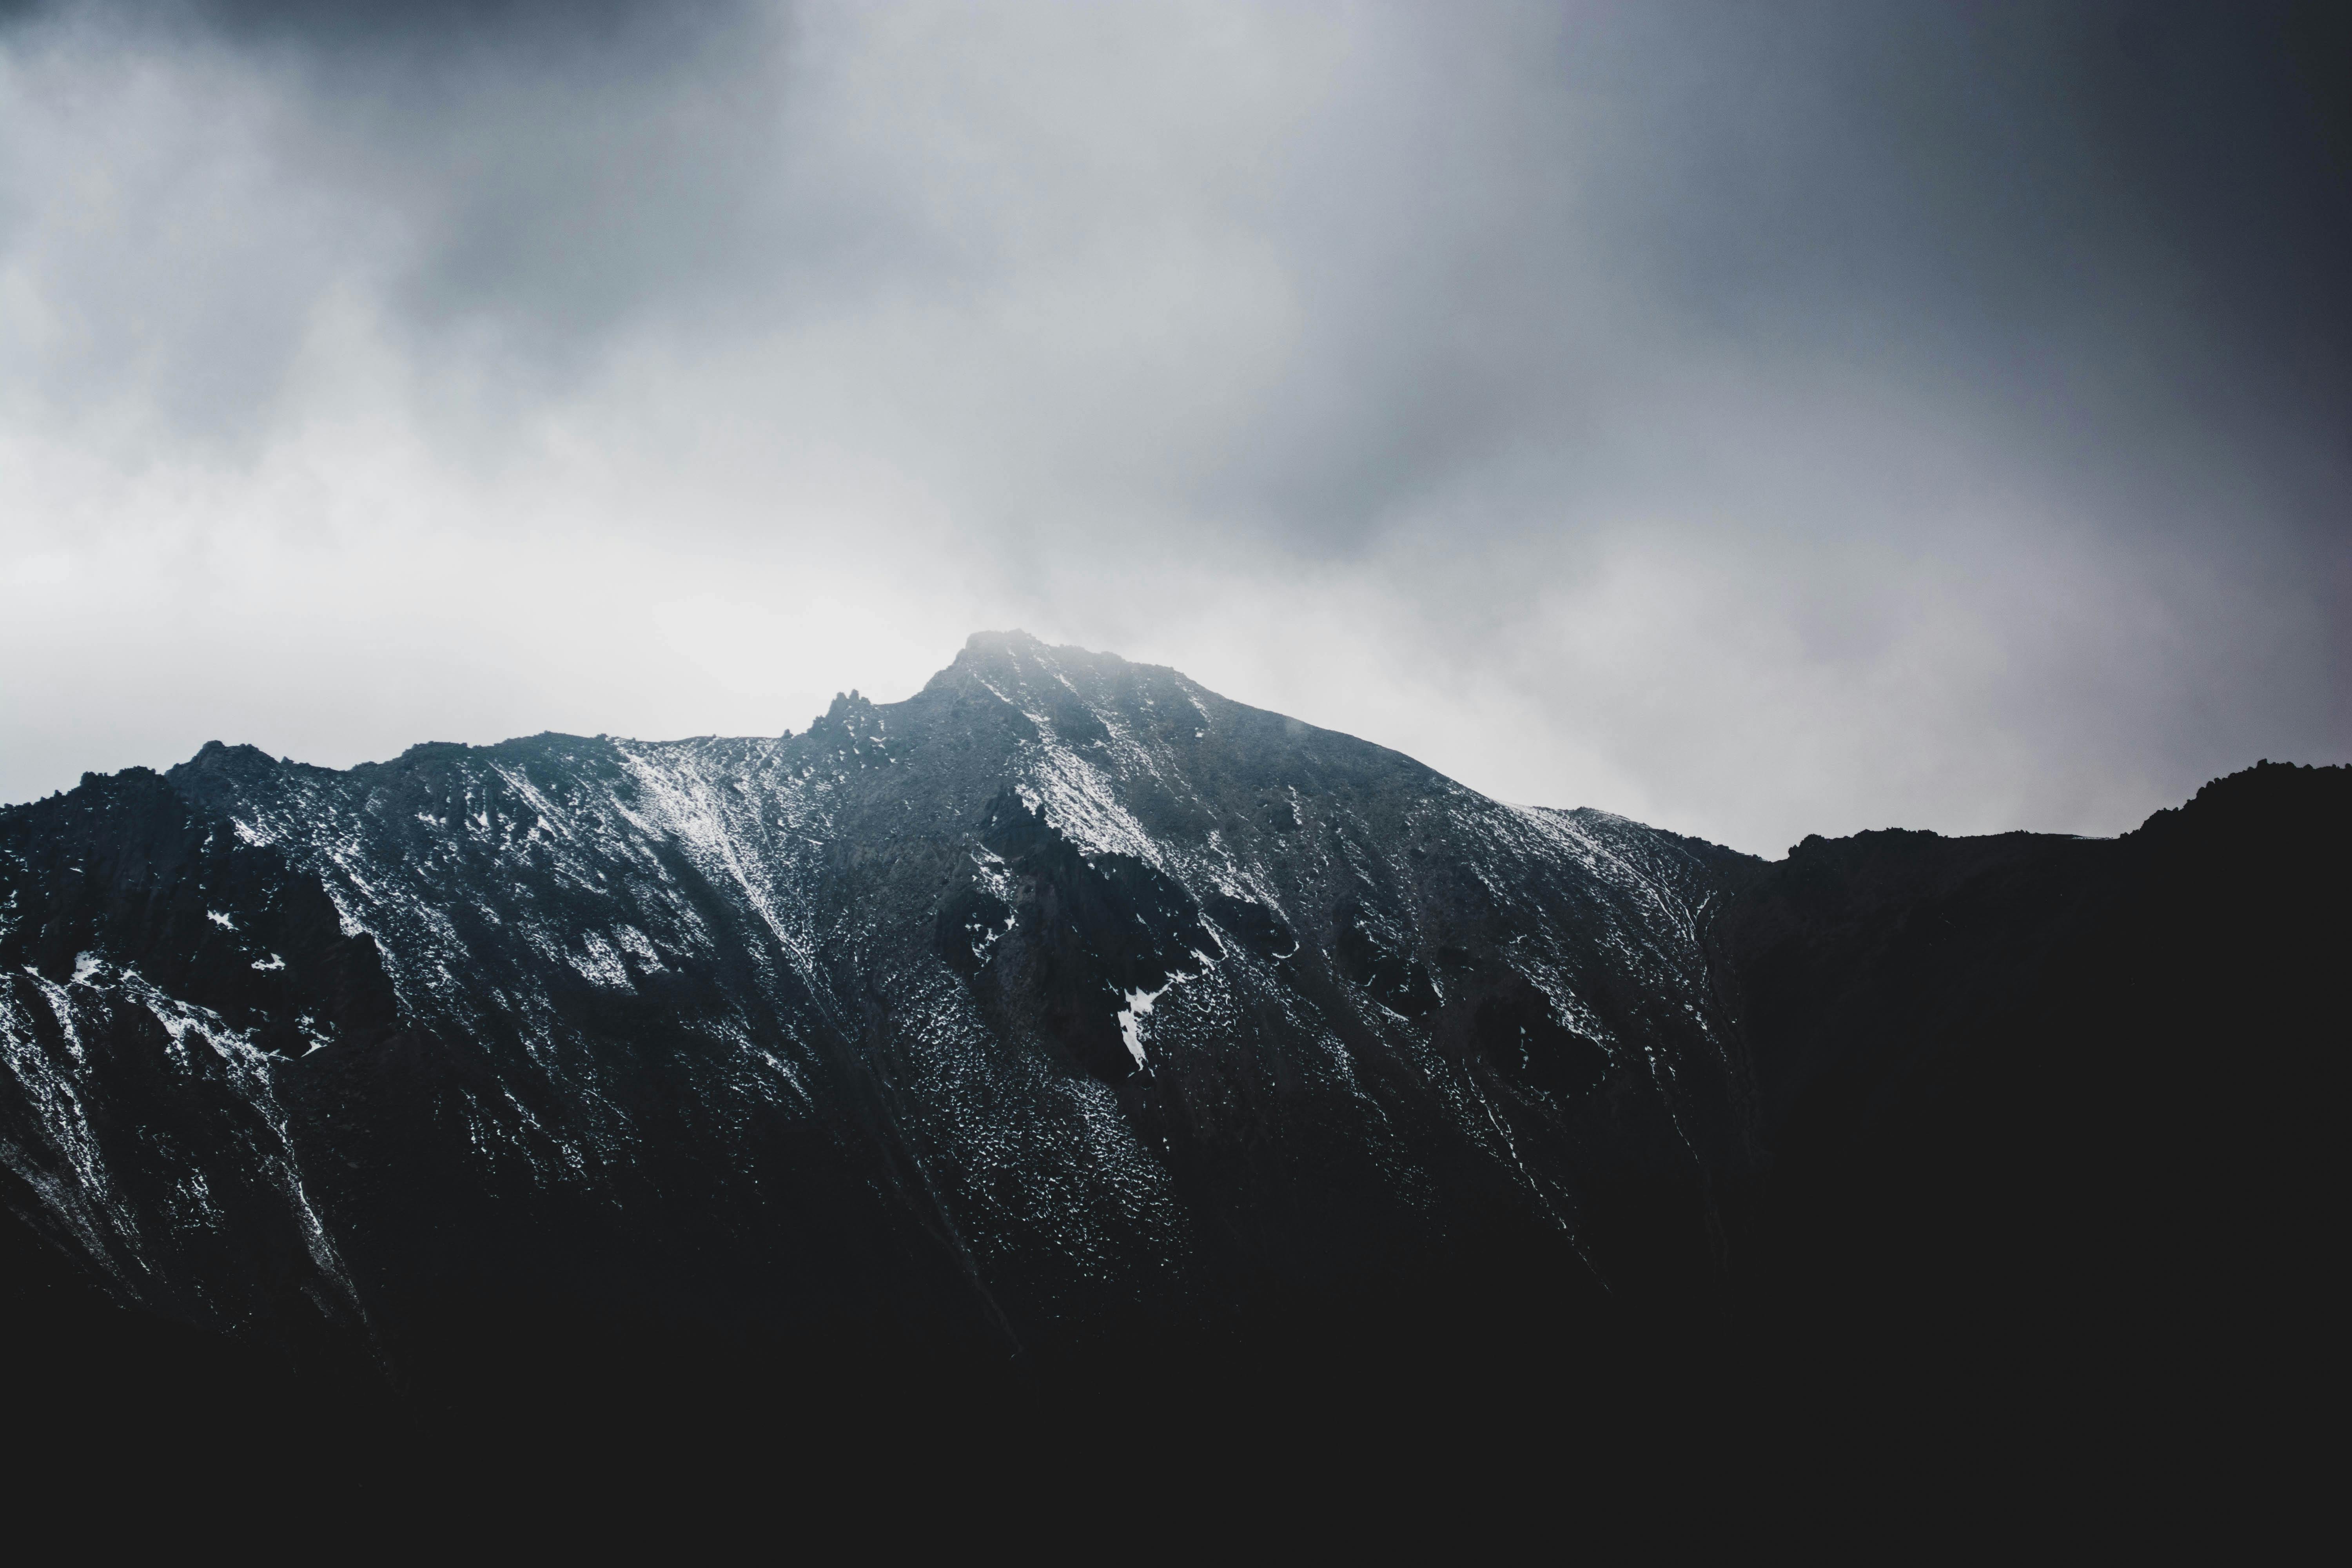 500 Dark Mountain Pictures  Download Free Images on Unsplash